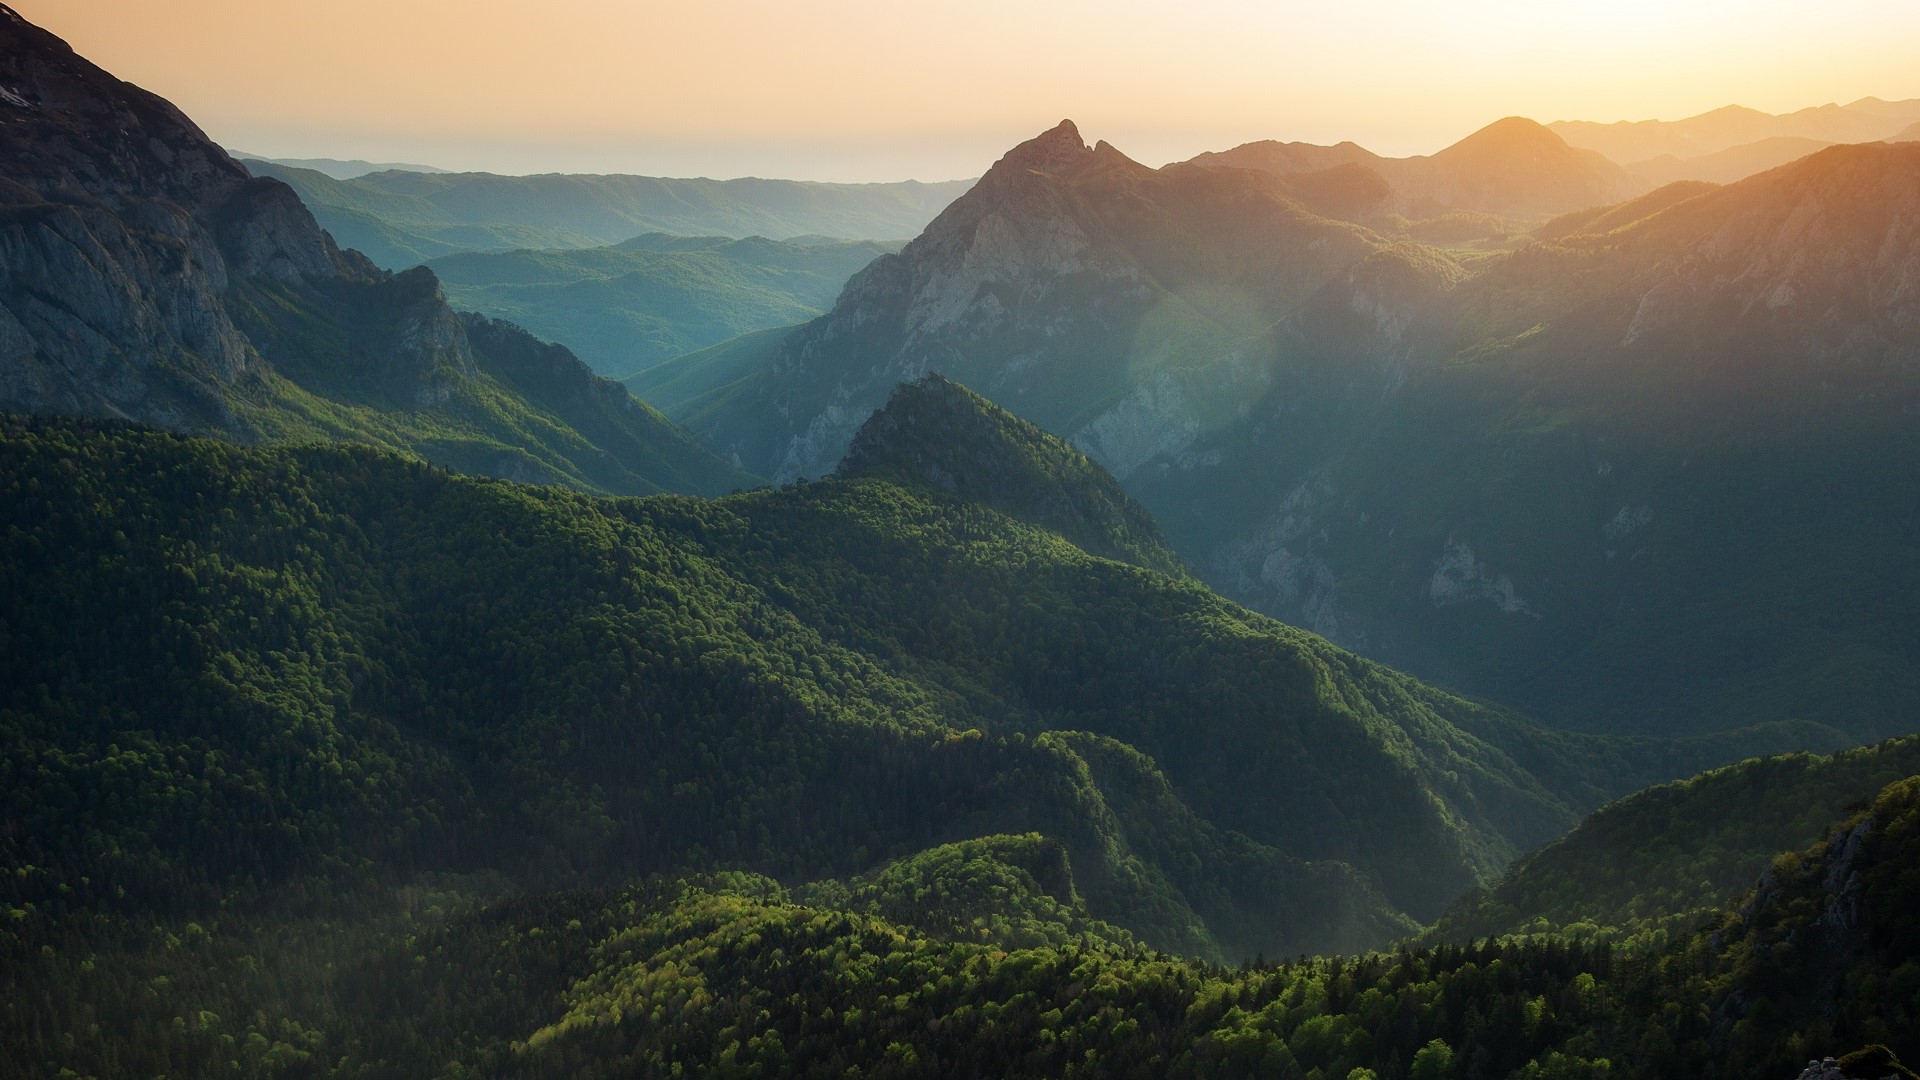 sunset over the Perućica forest and mountains in Bosnia and Herzegovina